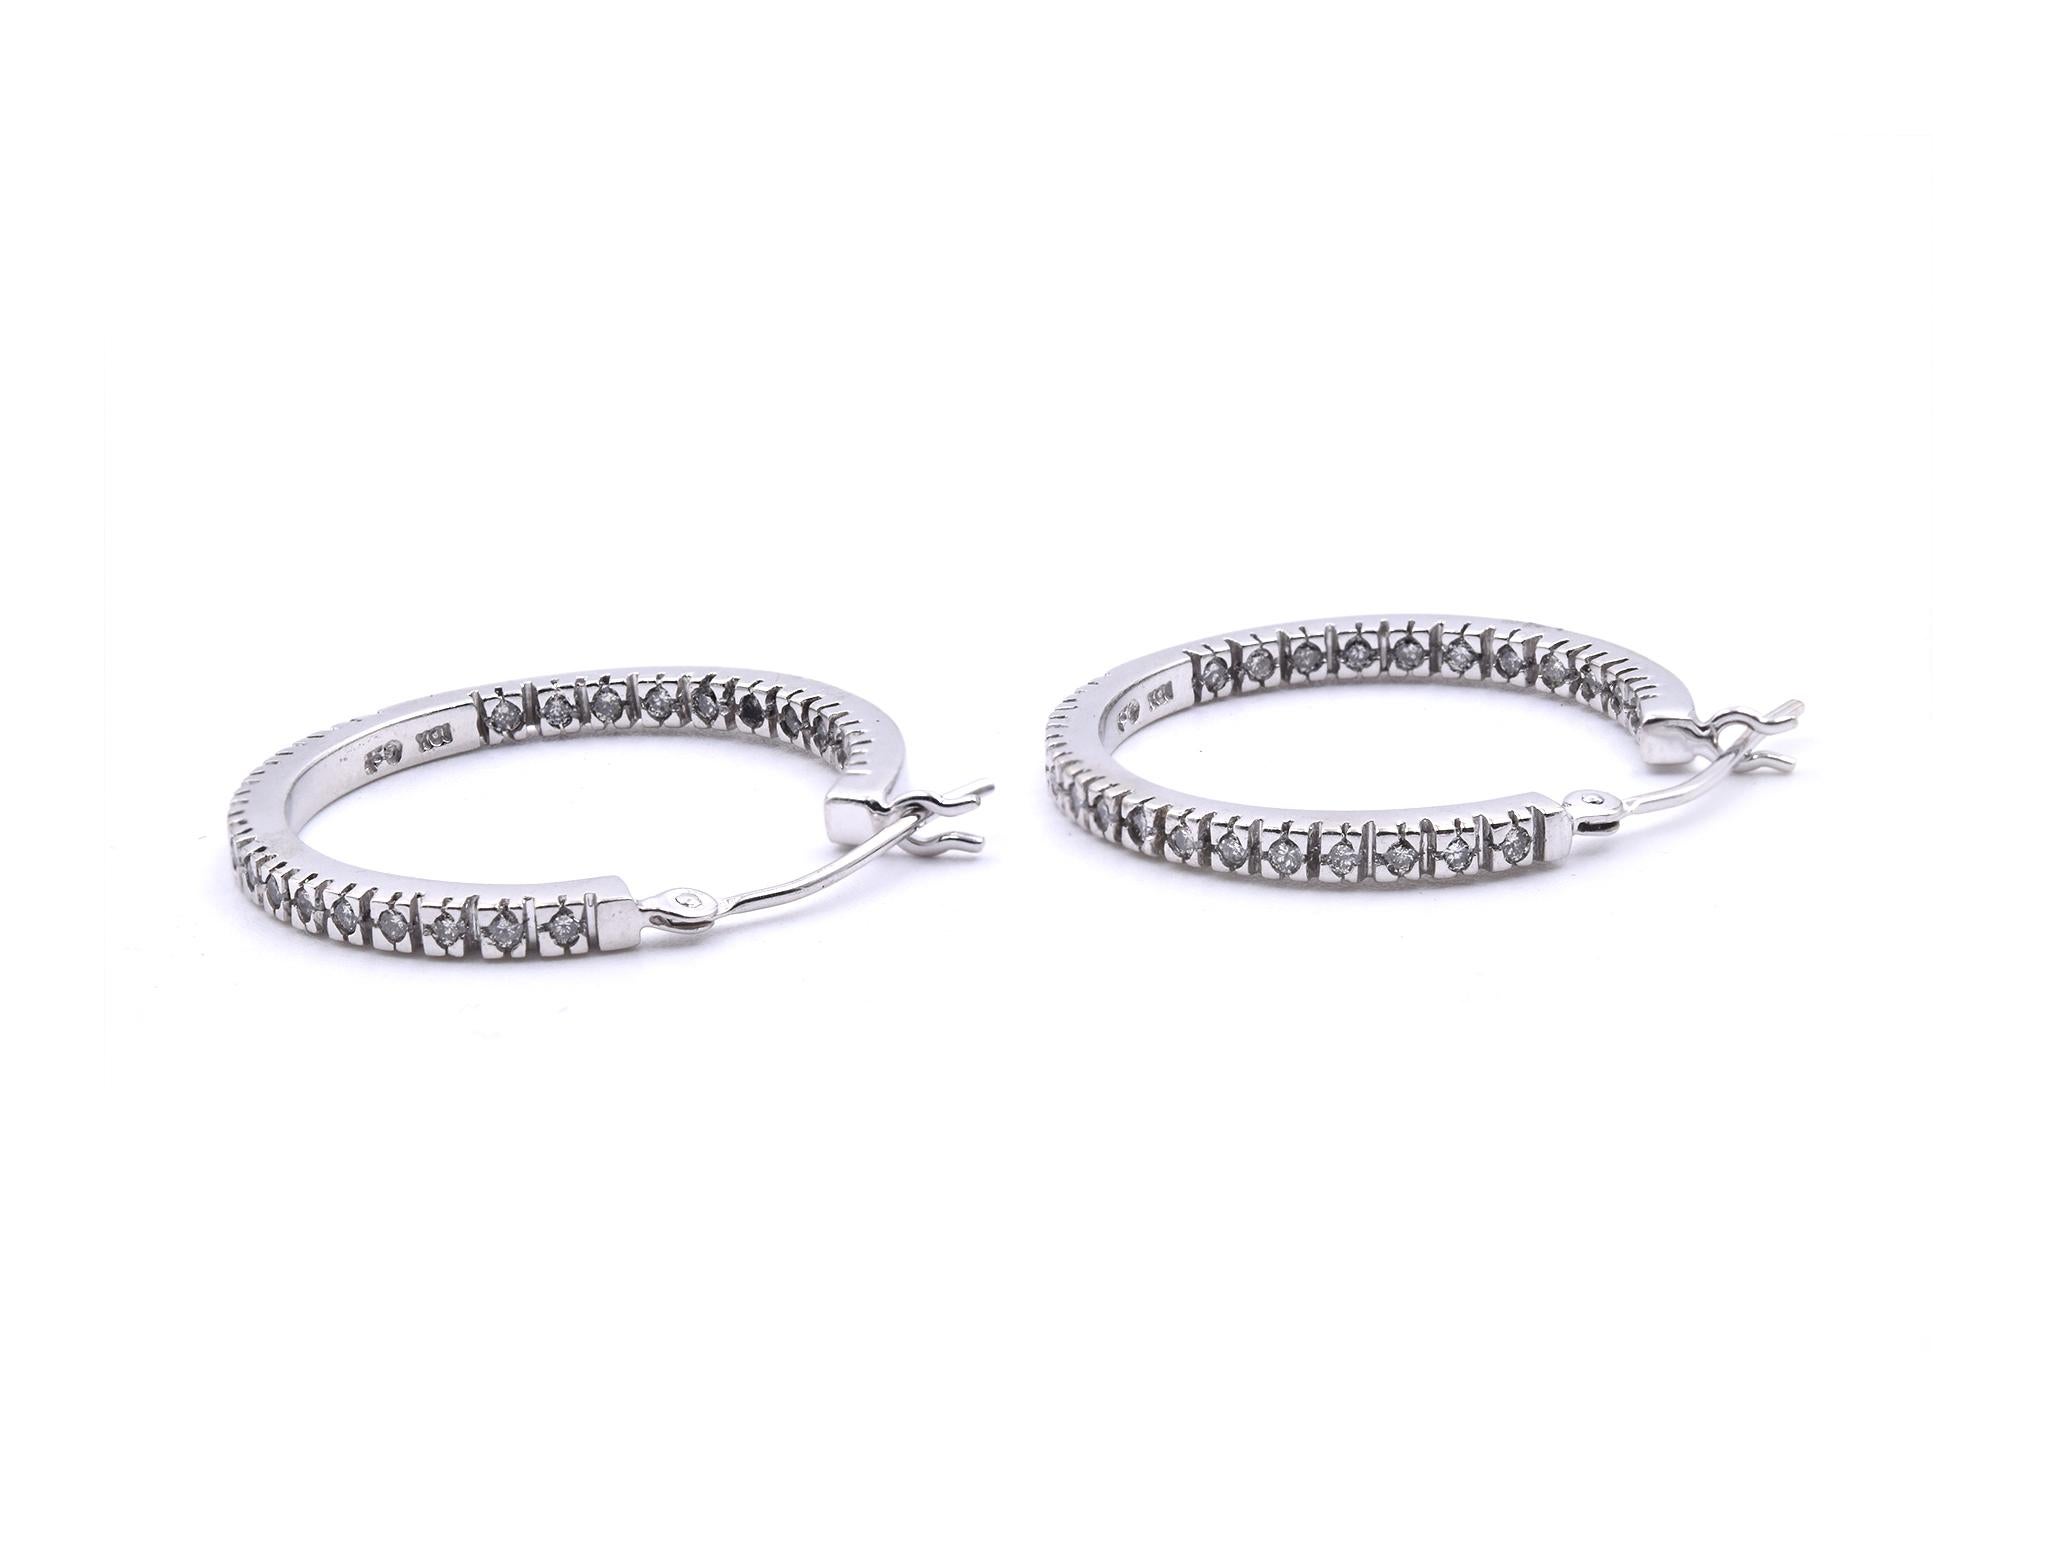 Material: 10K white gold
Diamonds: 52 round brilliant cuts = .52cttw
Color: H
Clarity: SI1
Dimensions: earrings measure 23mm X 2mm
Fastenings: snap closures
Weight: 4.43 grams
